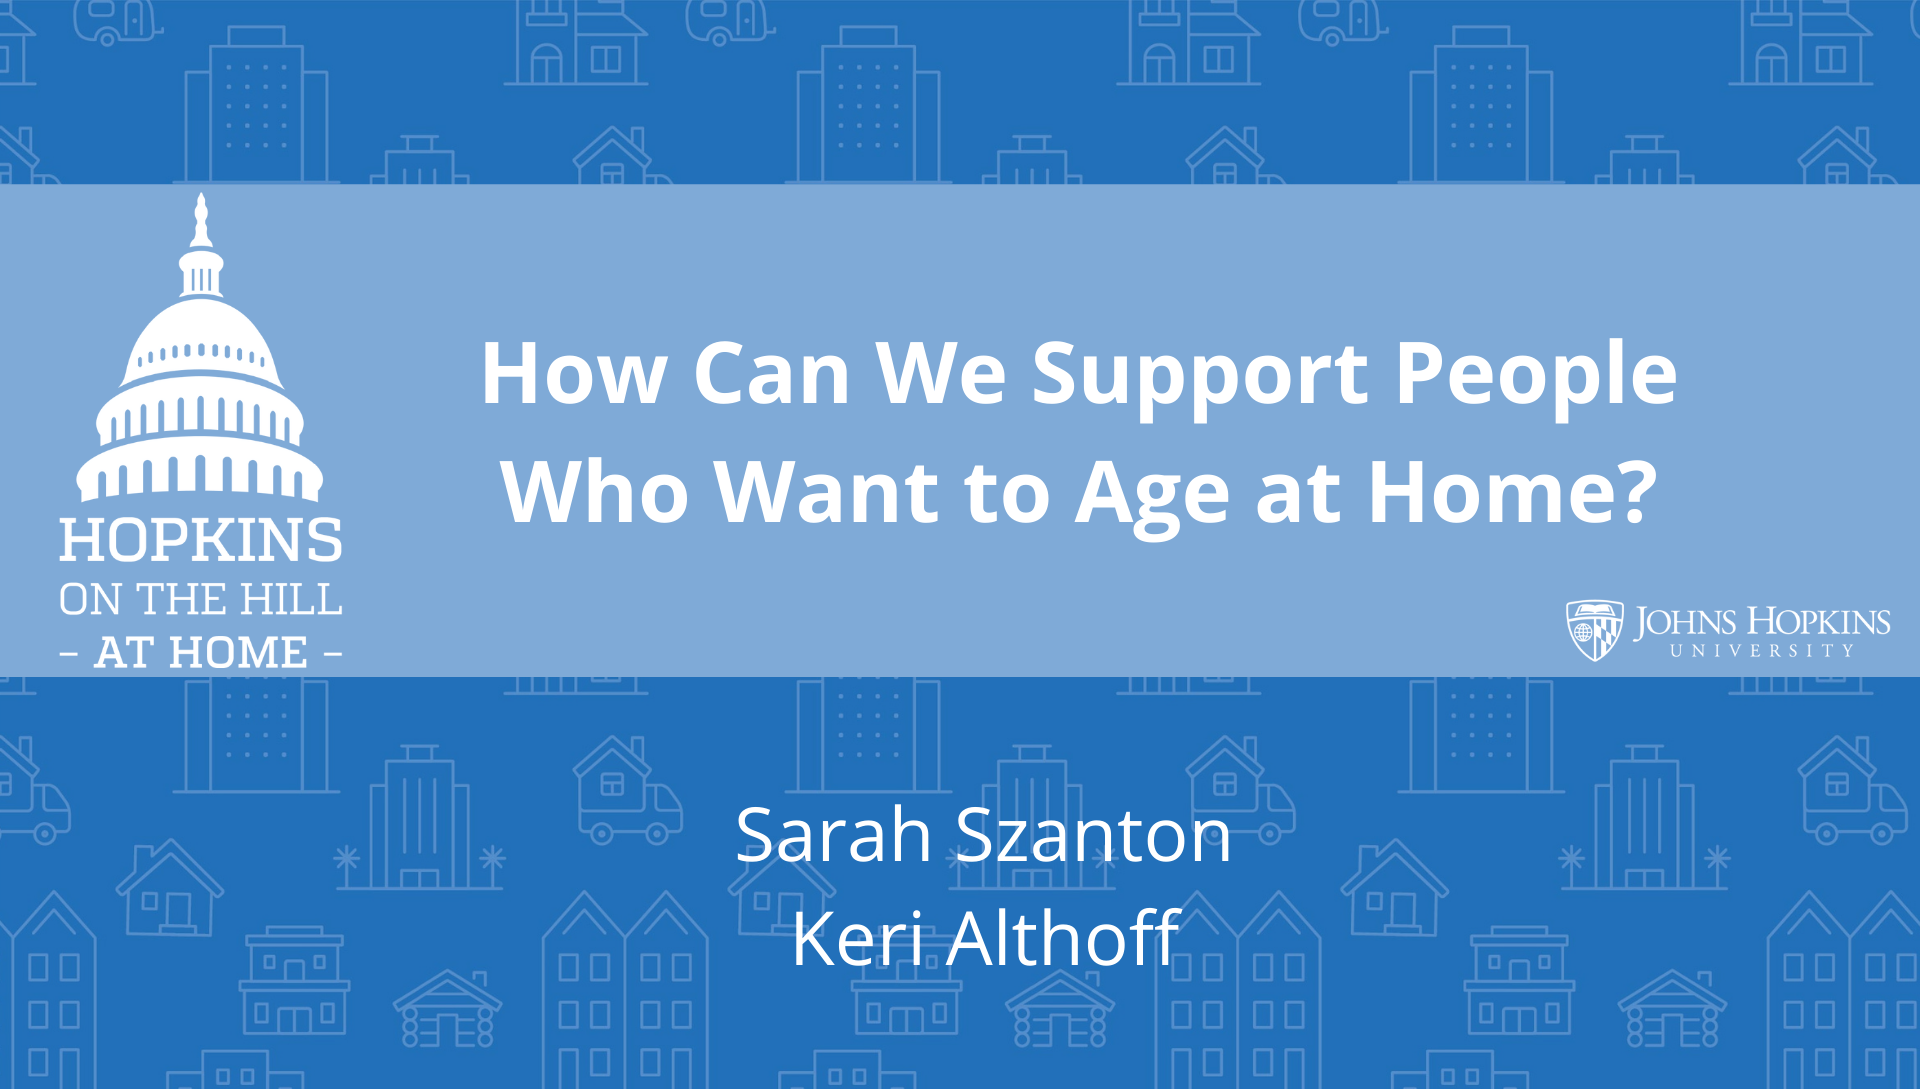 Solid blue background featuring line drawings of various types of homes with text reading “How can we support people who want to age at home?” and names listed below: Sarah Szanton, Keri Althoff. On the left the Hopkins on the Hill at Home logo featuring the Capitol Dome. On the right, the Johns Hopkins University logo. 